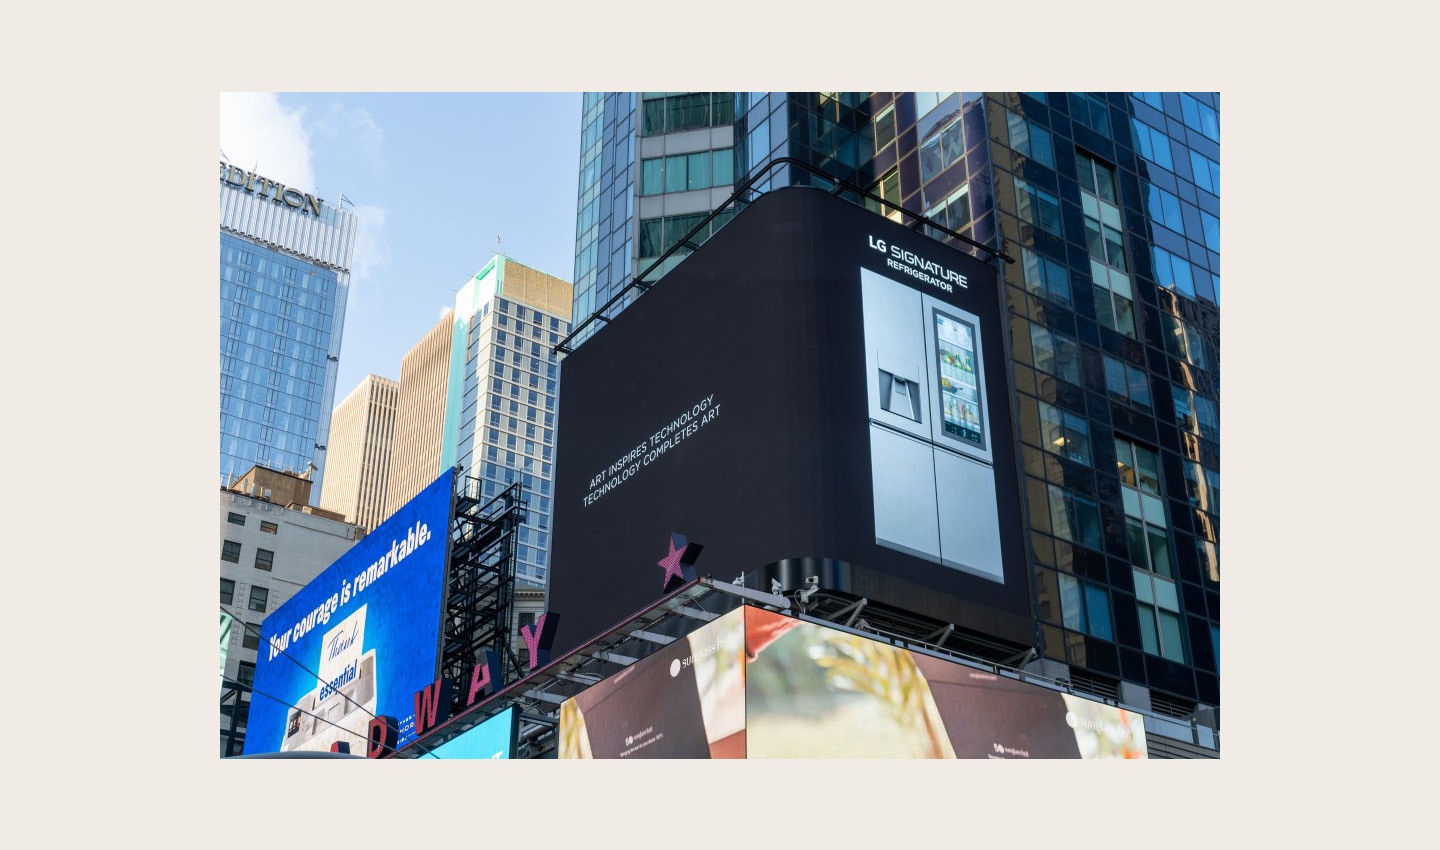 LG's digital billboard in Time Square, New York with an image of LG SIGNATURE Refrigerator against a black background